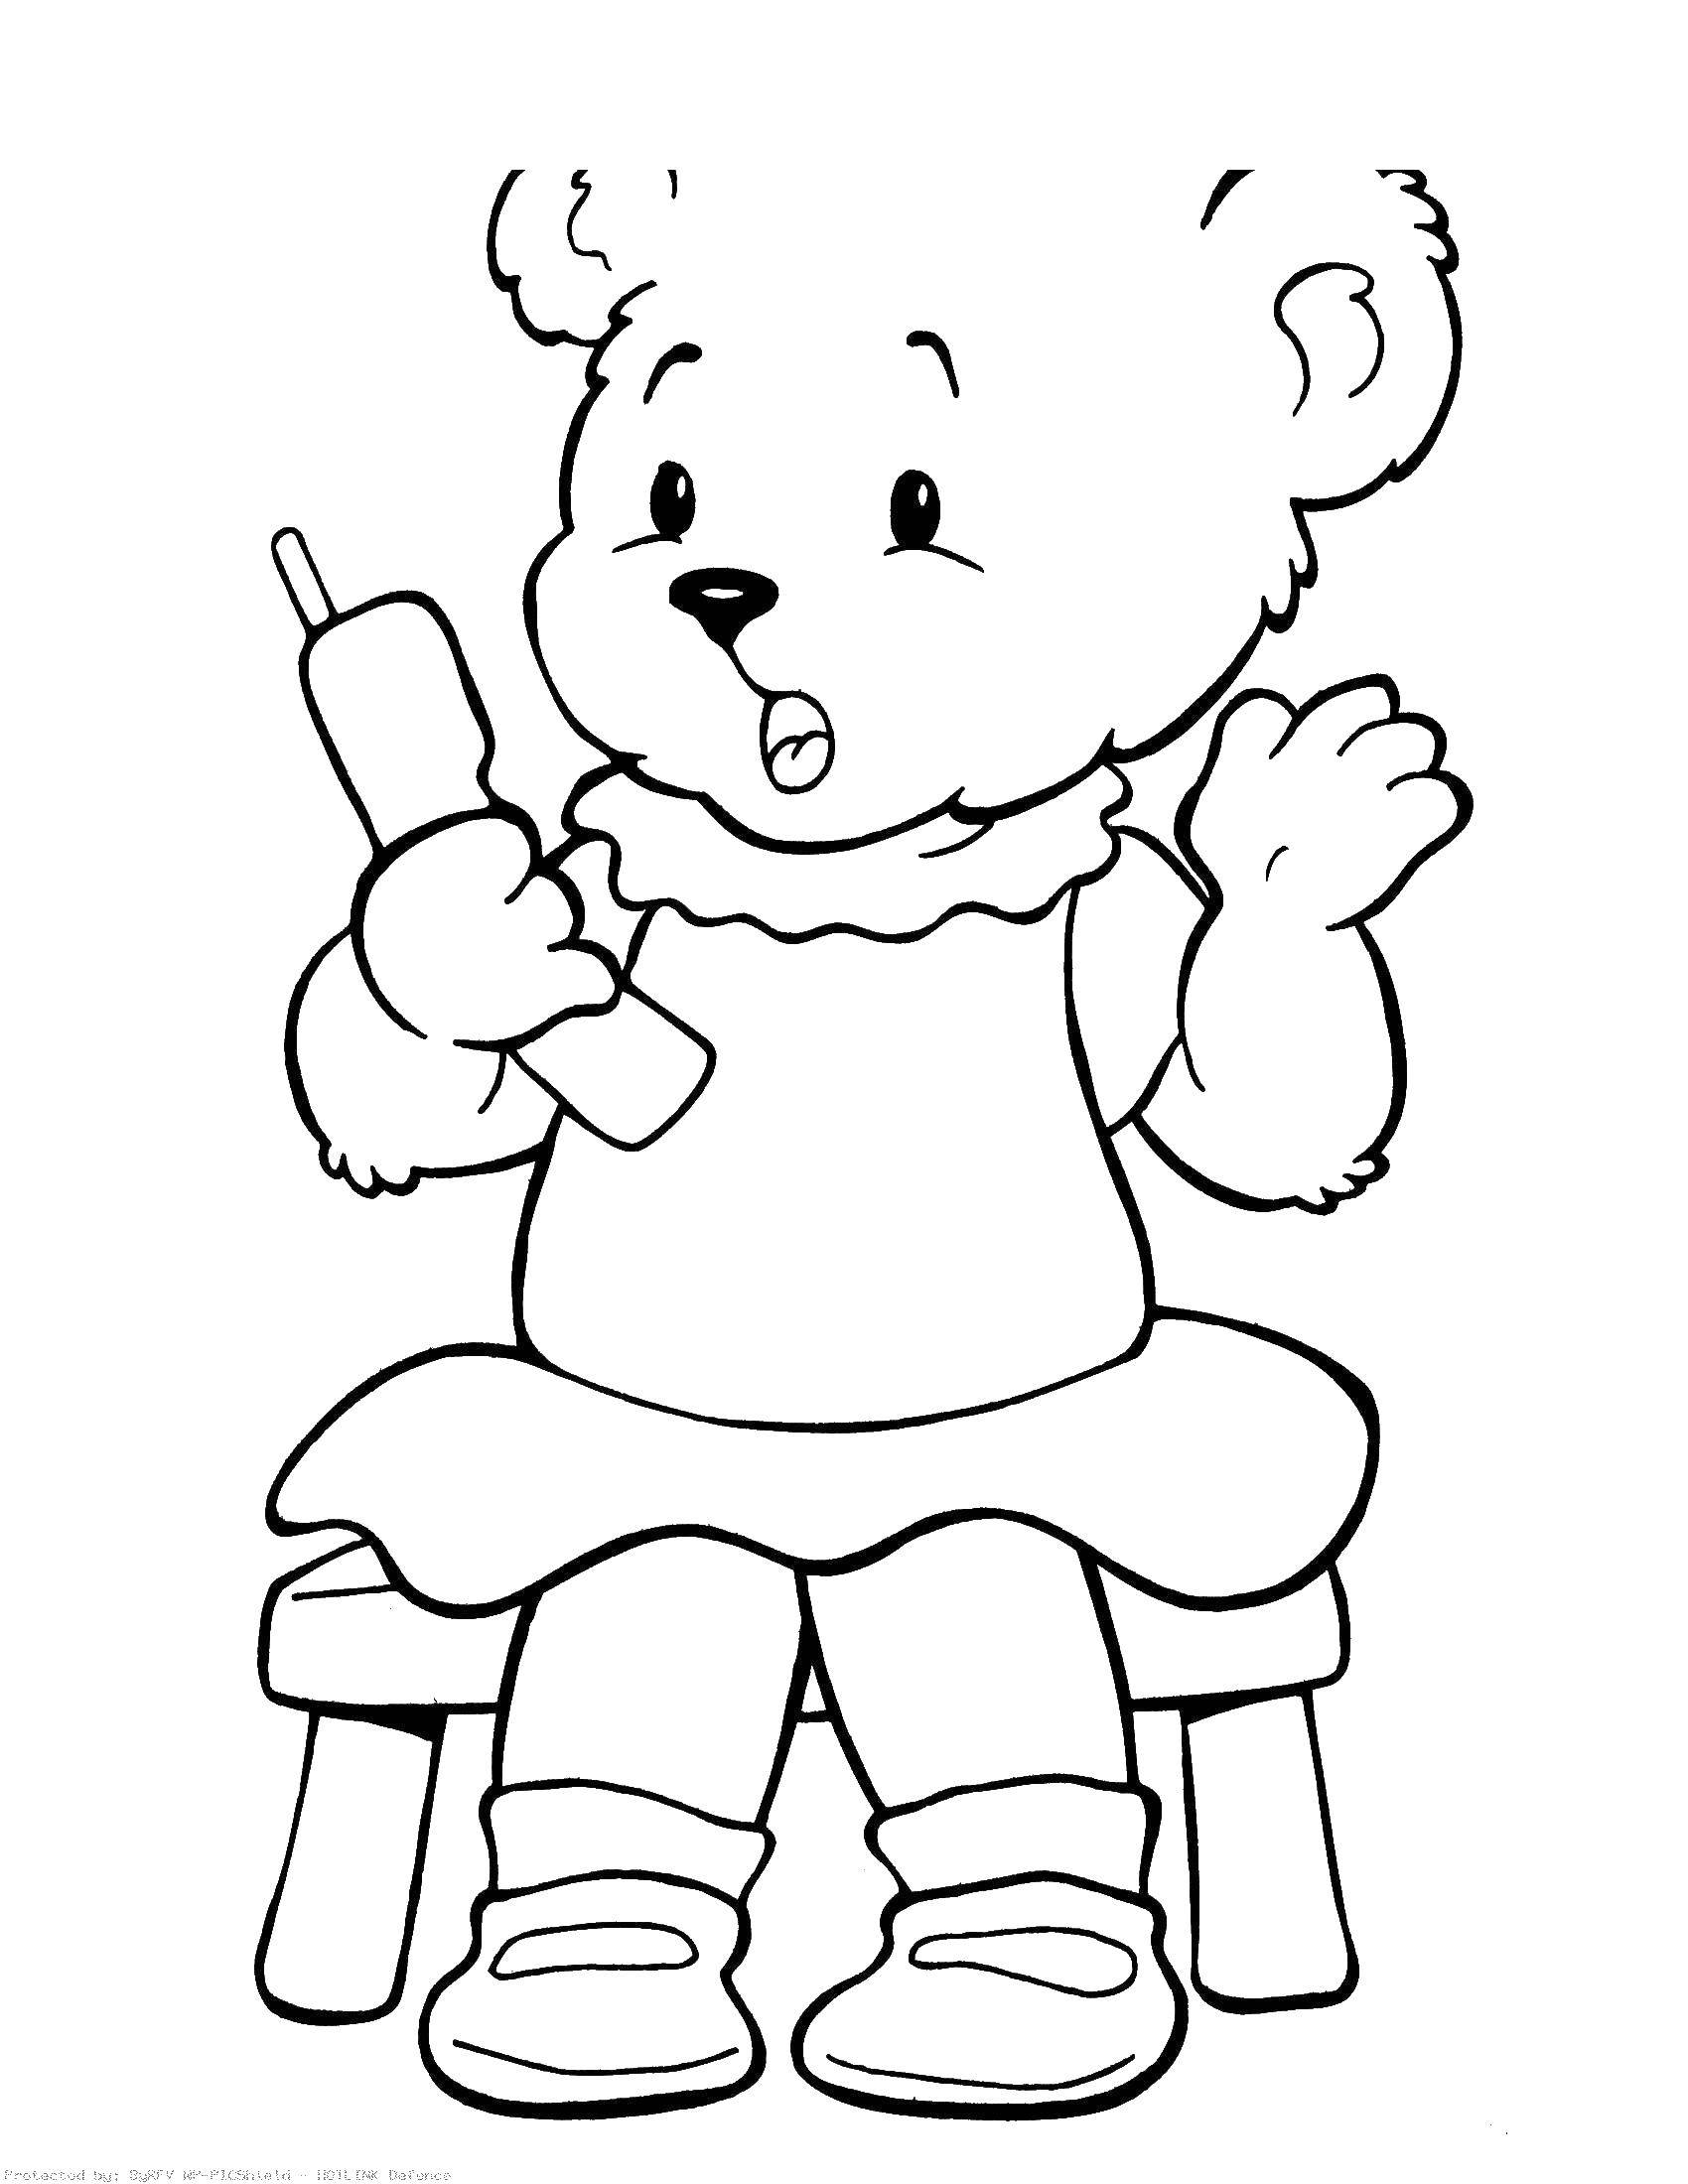 Coloring Bear talking on the phone. Category Animals. Tags:  the bear, telephone.